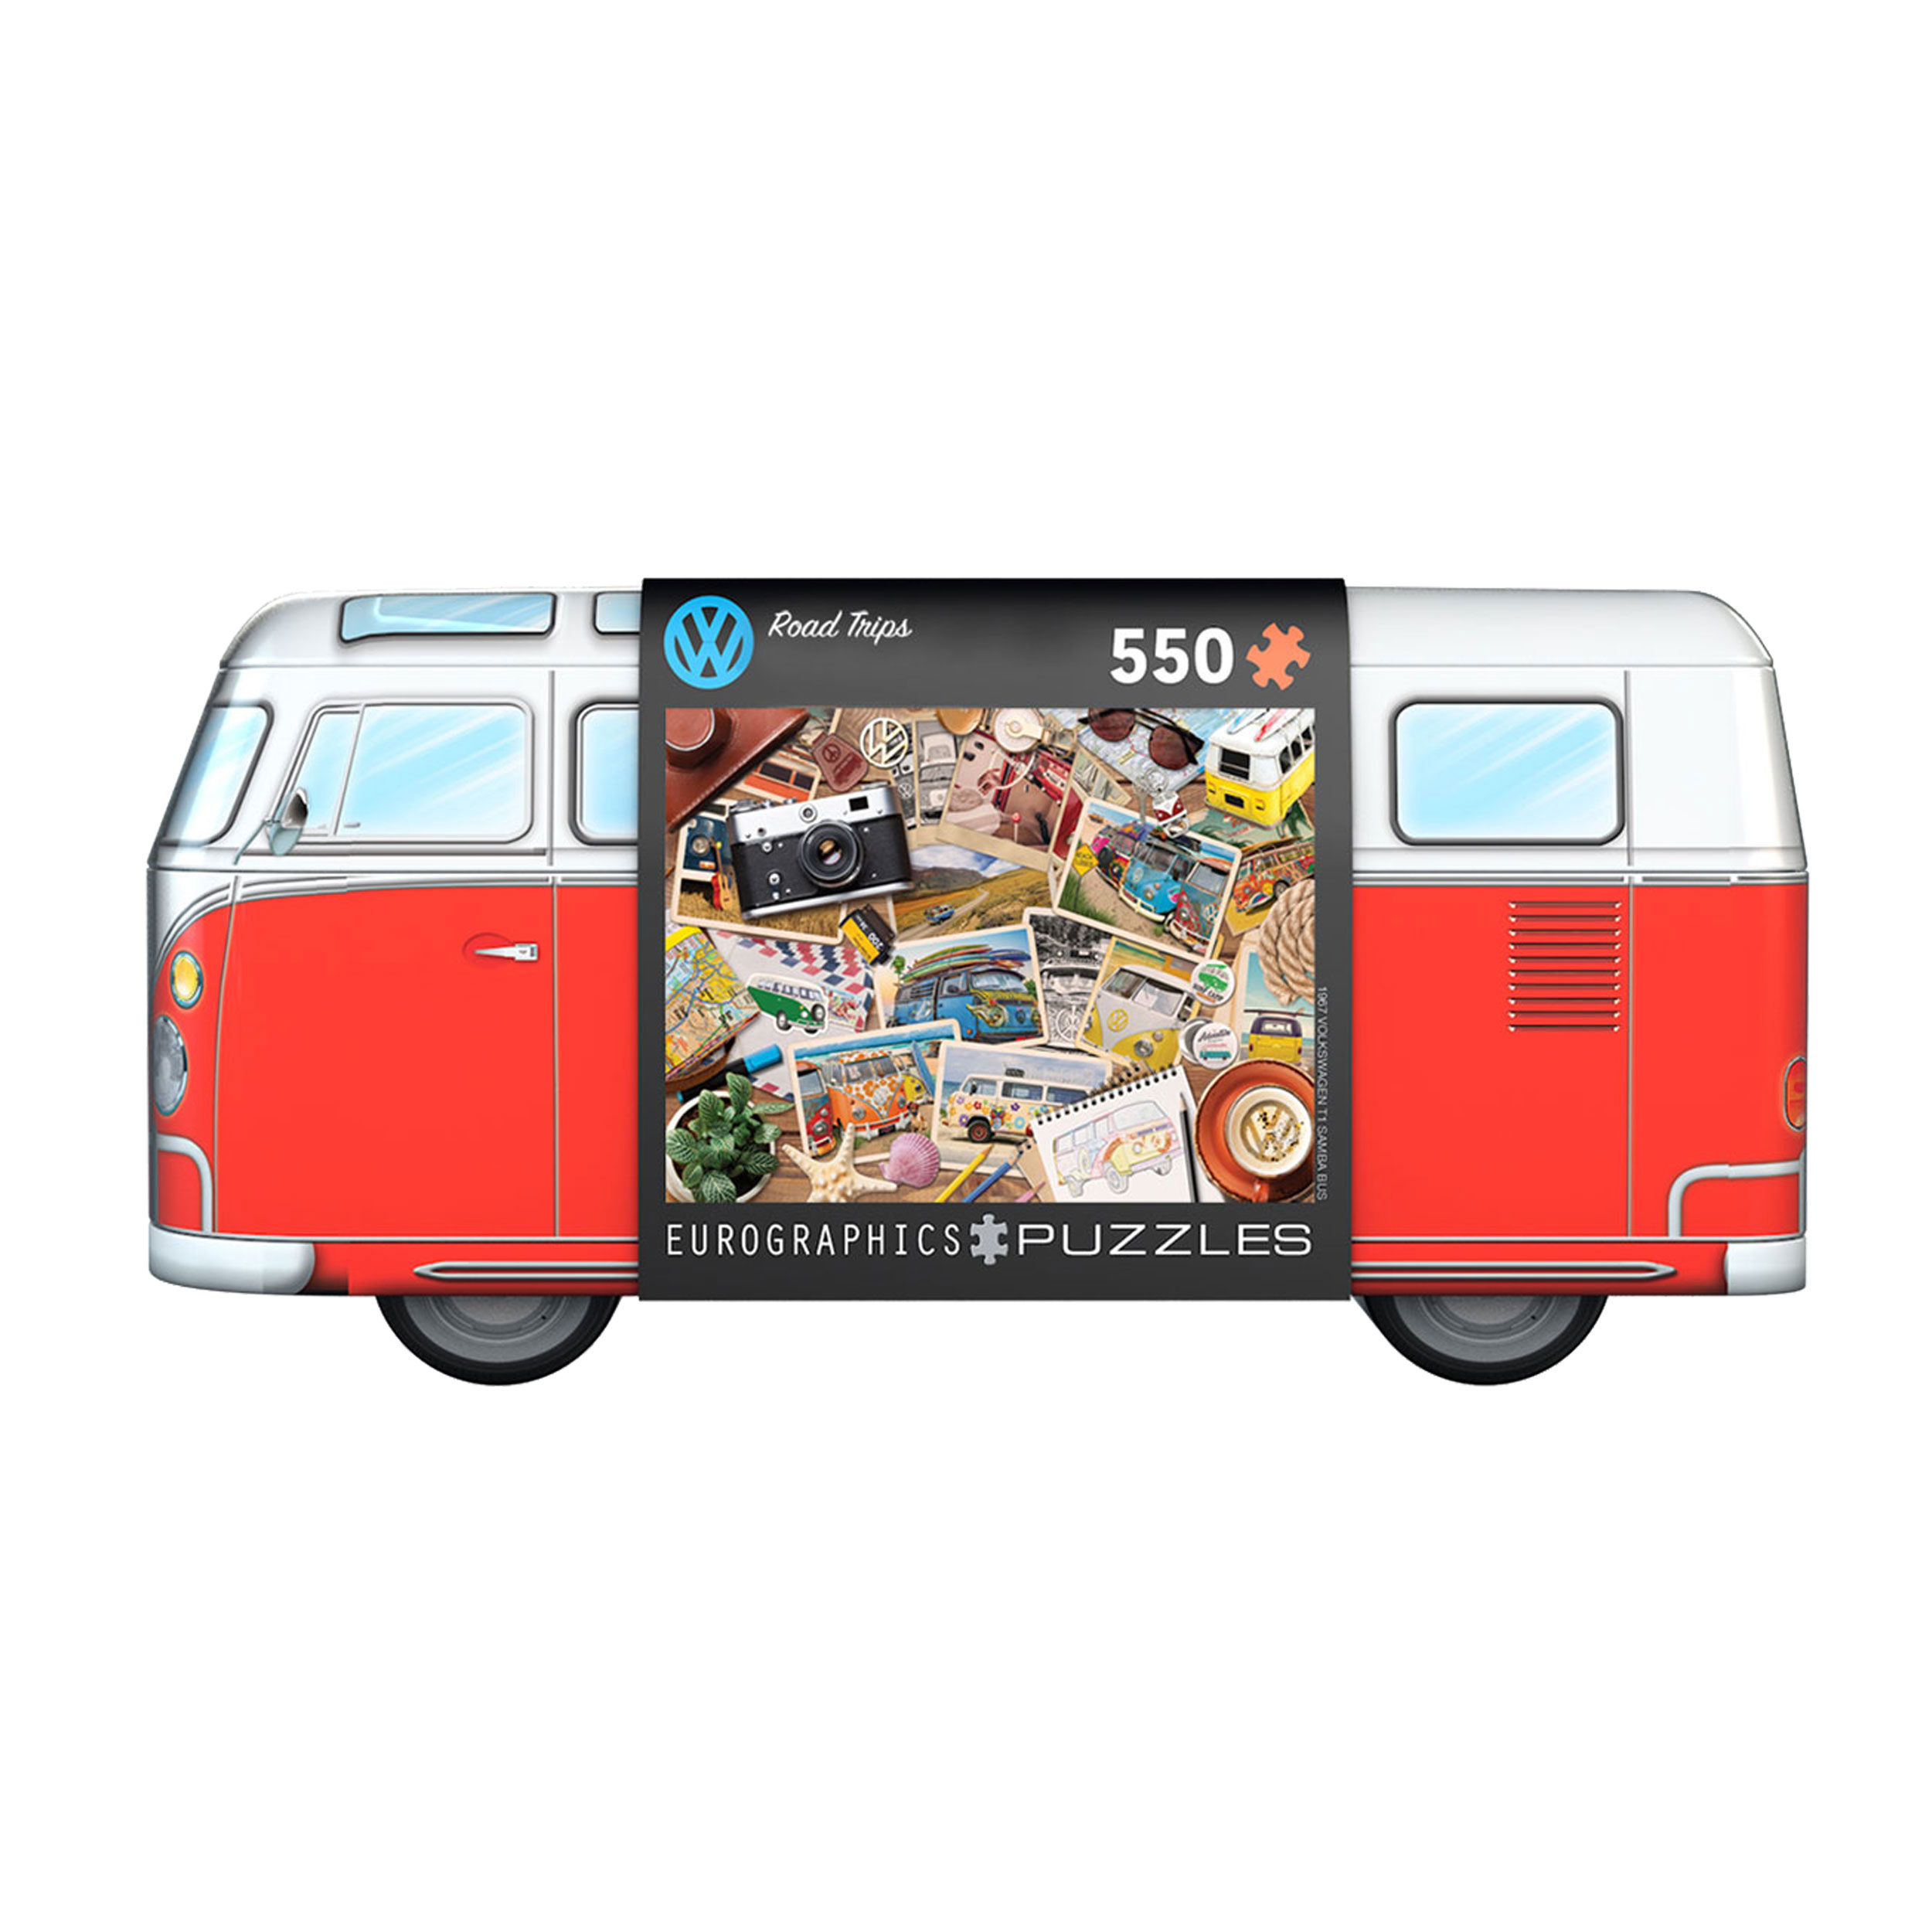 EUROGRAPHICS VW Puzzledose Trips Road - Bus Puzzle in